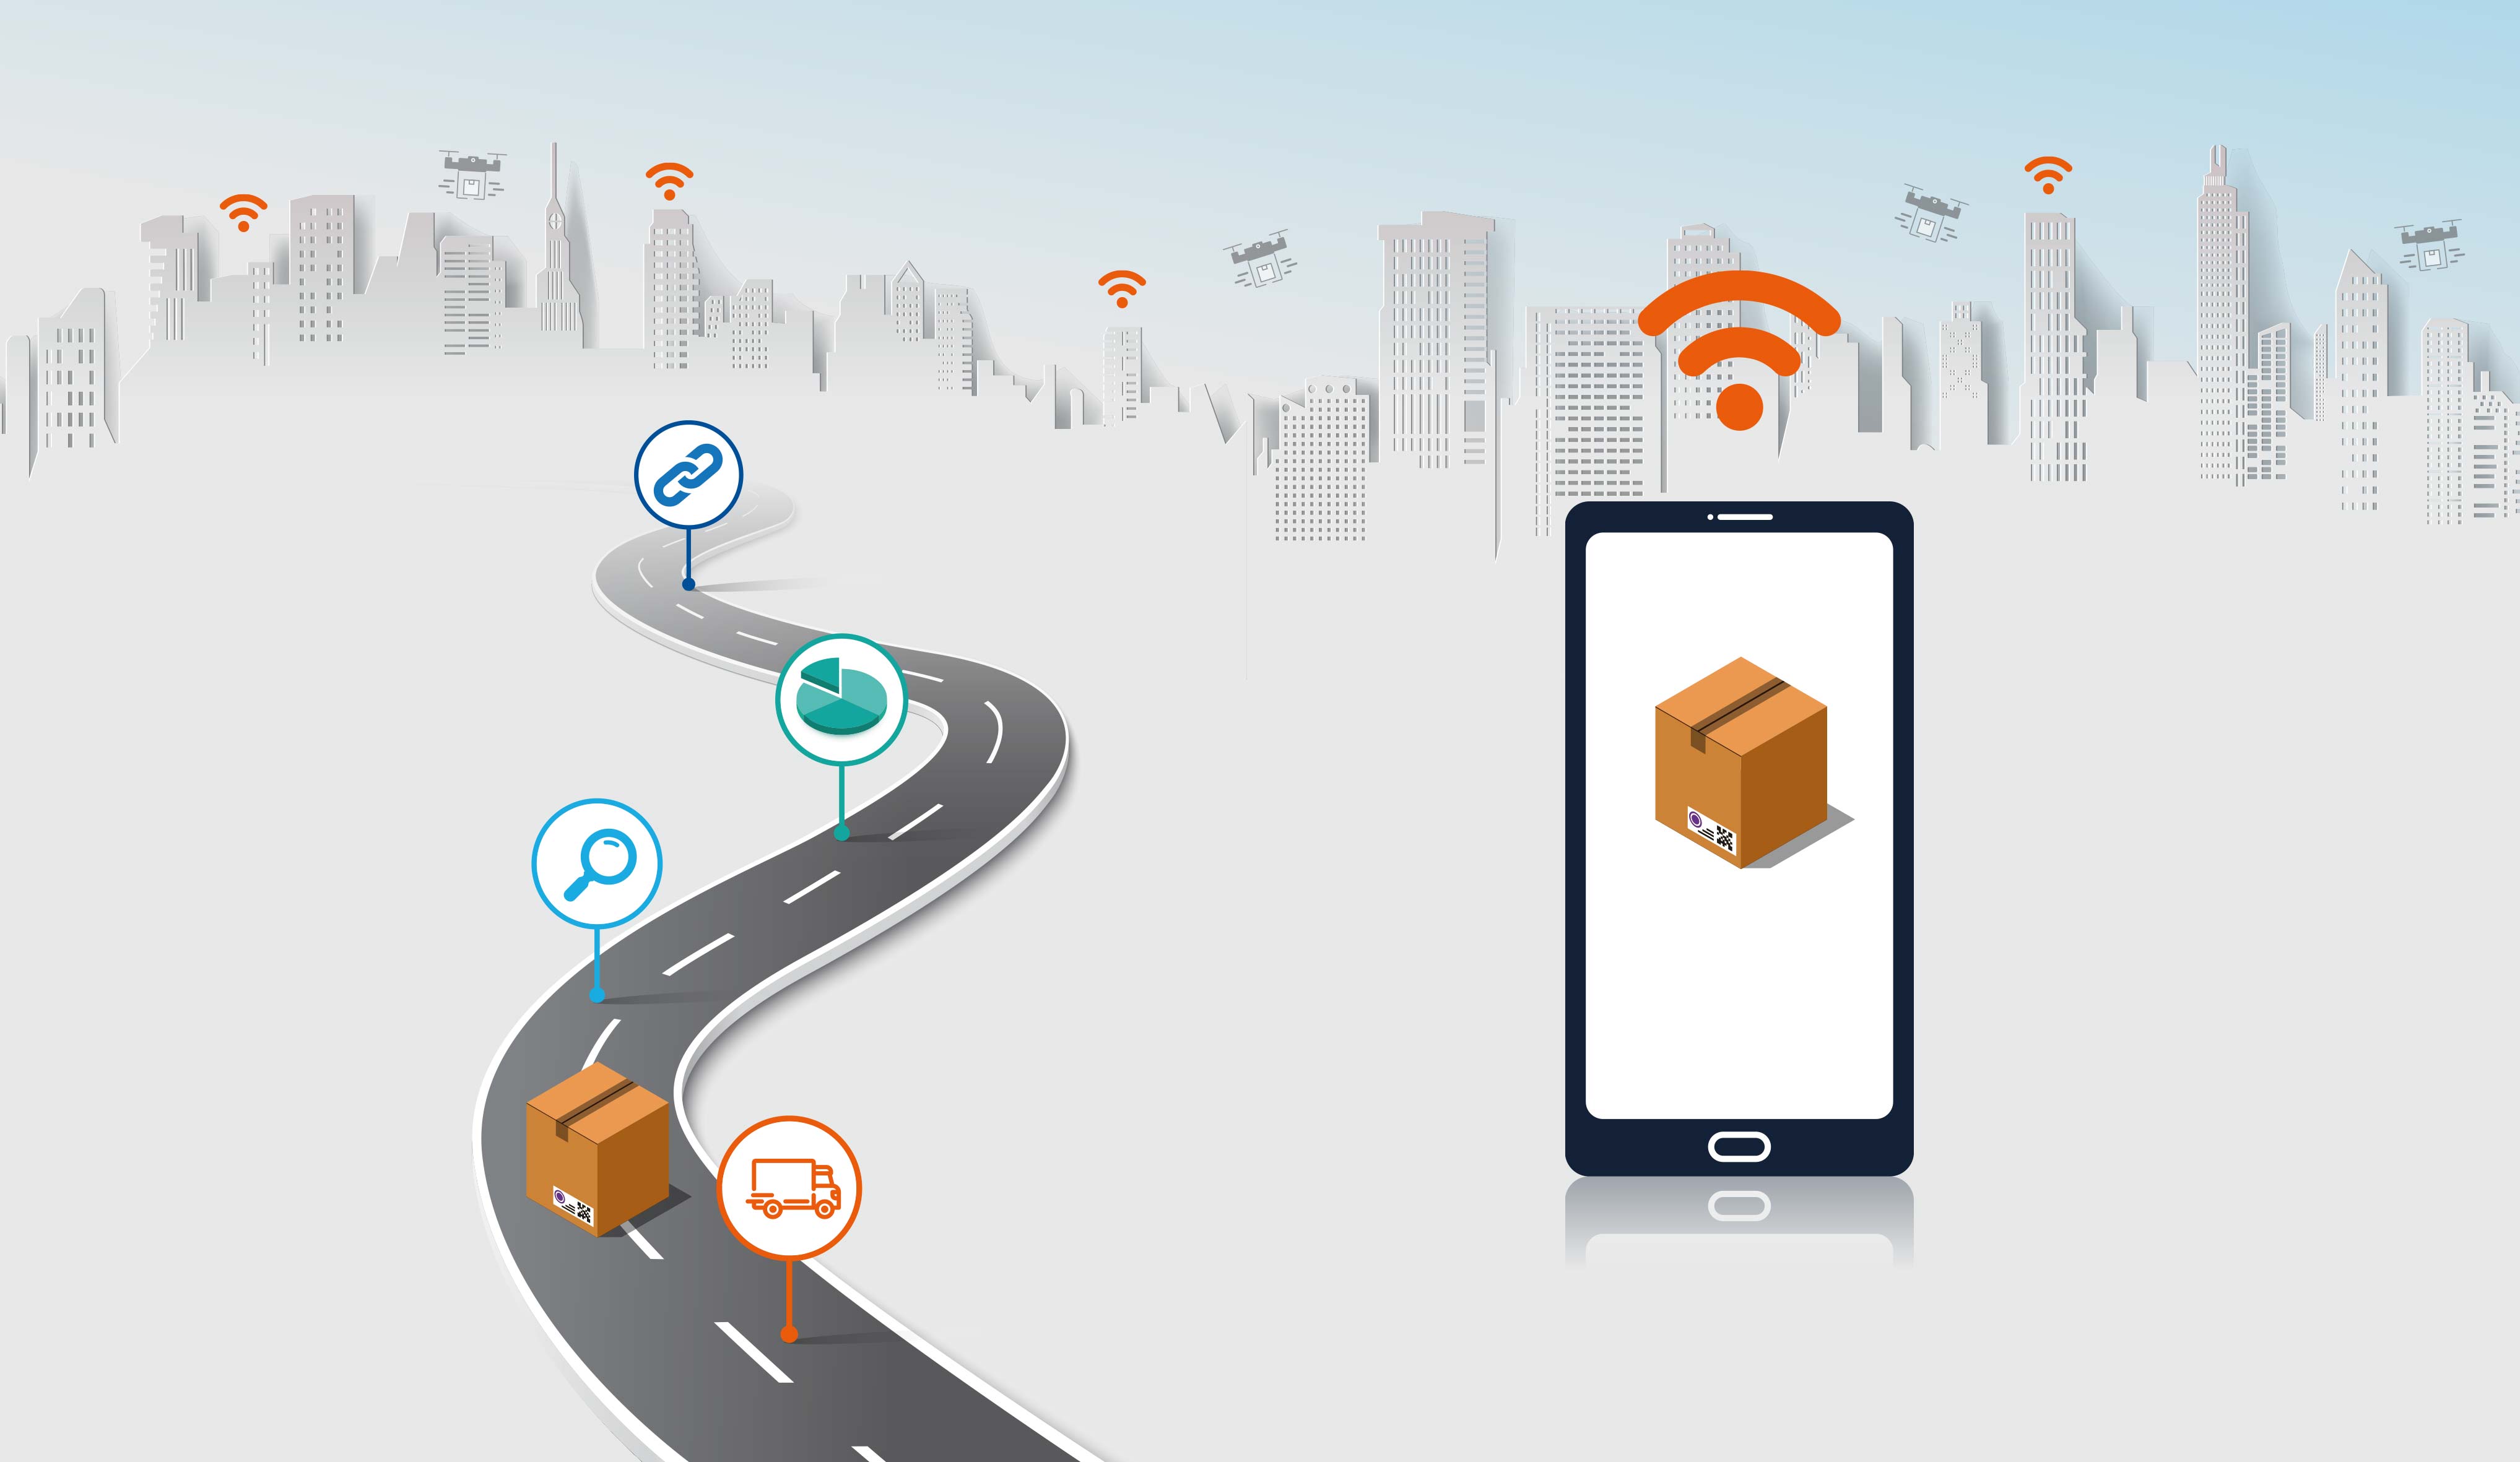 New business models are changing last-mile delivery transport